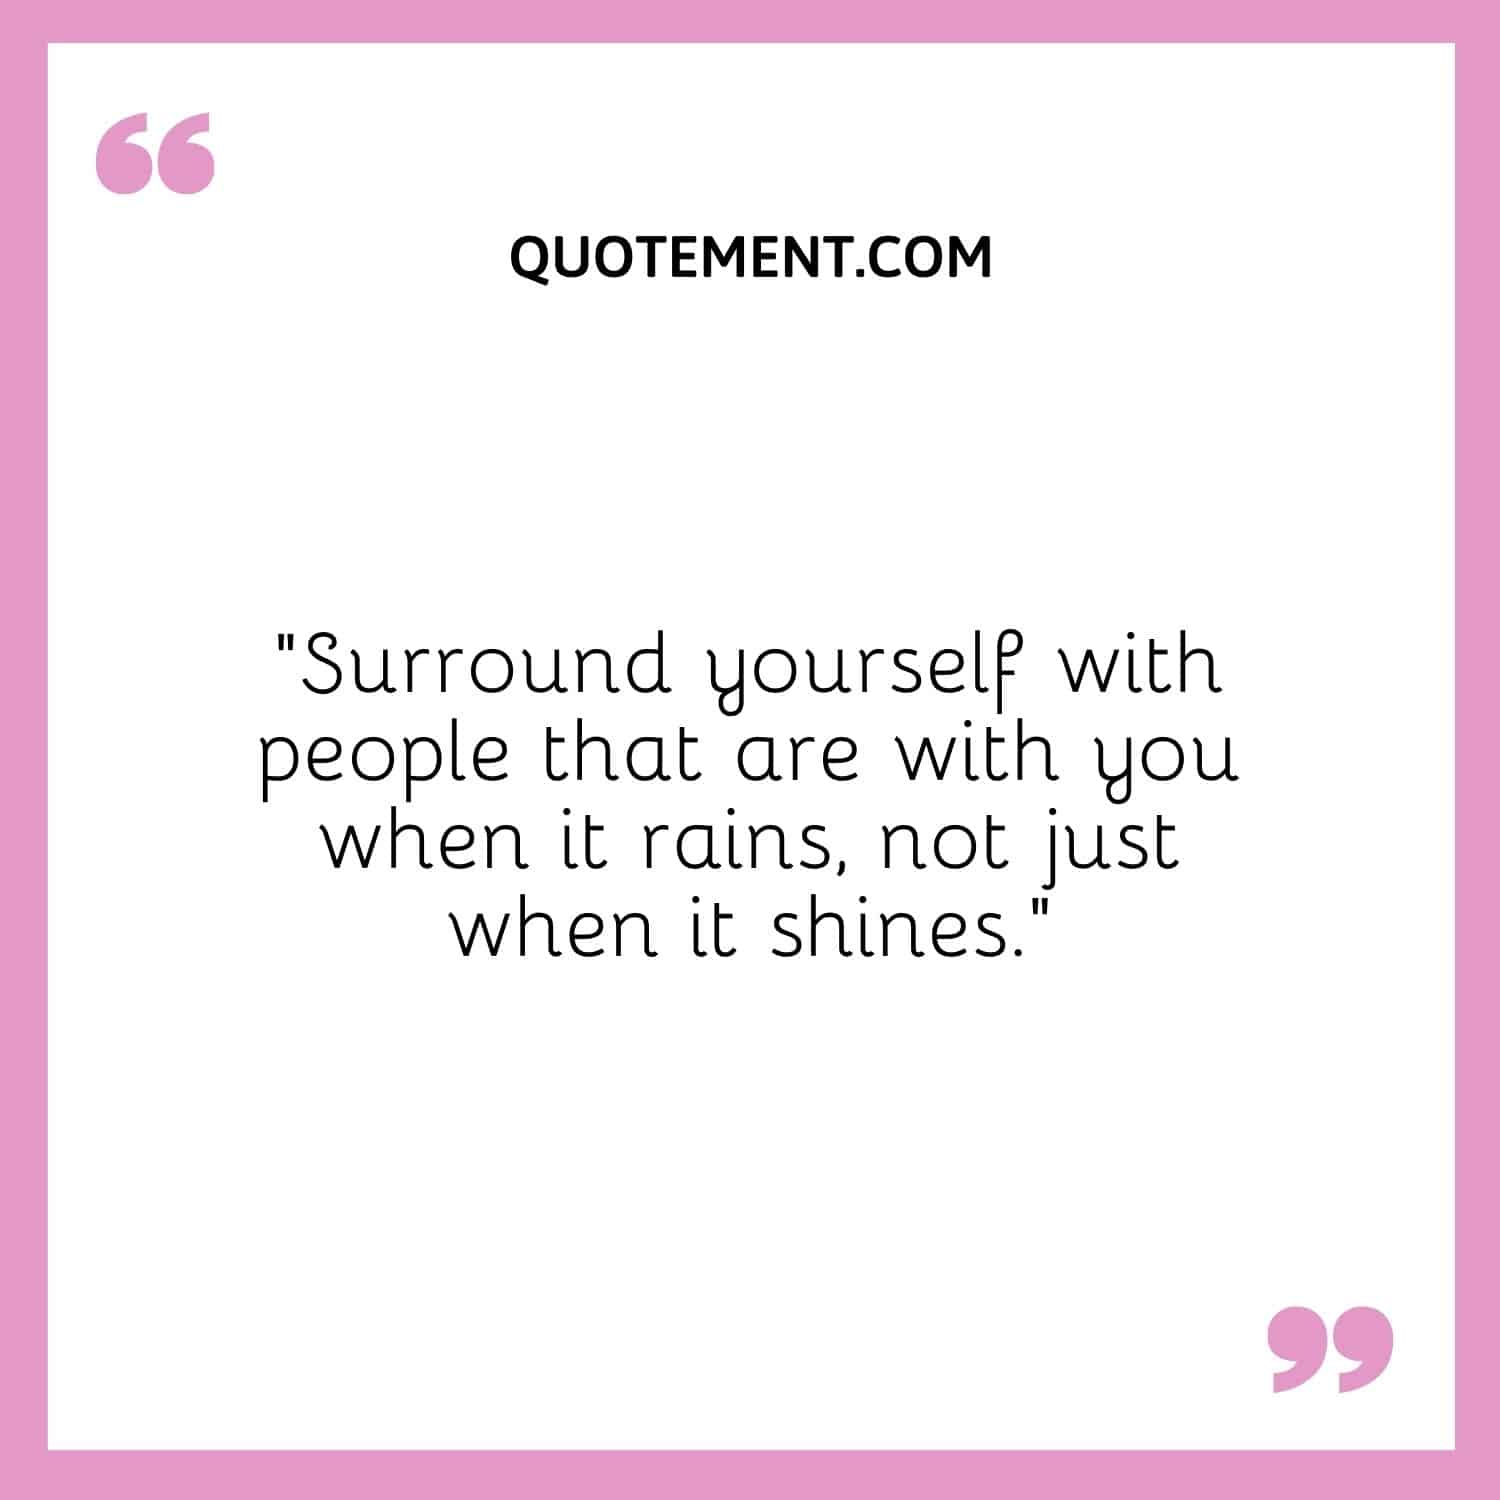 Surround yourself with people that are with you when it rains, not just when it shines.